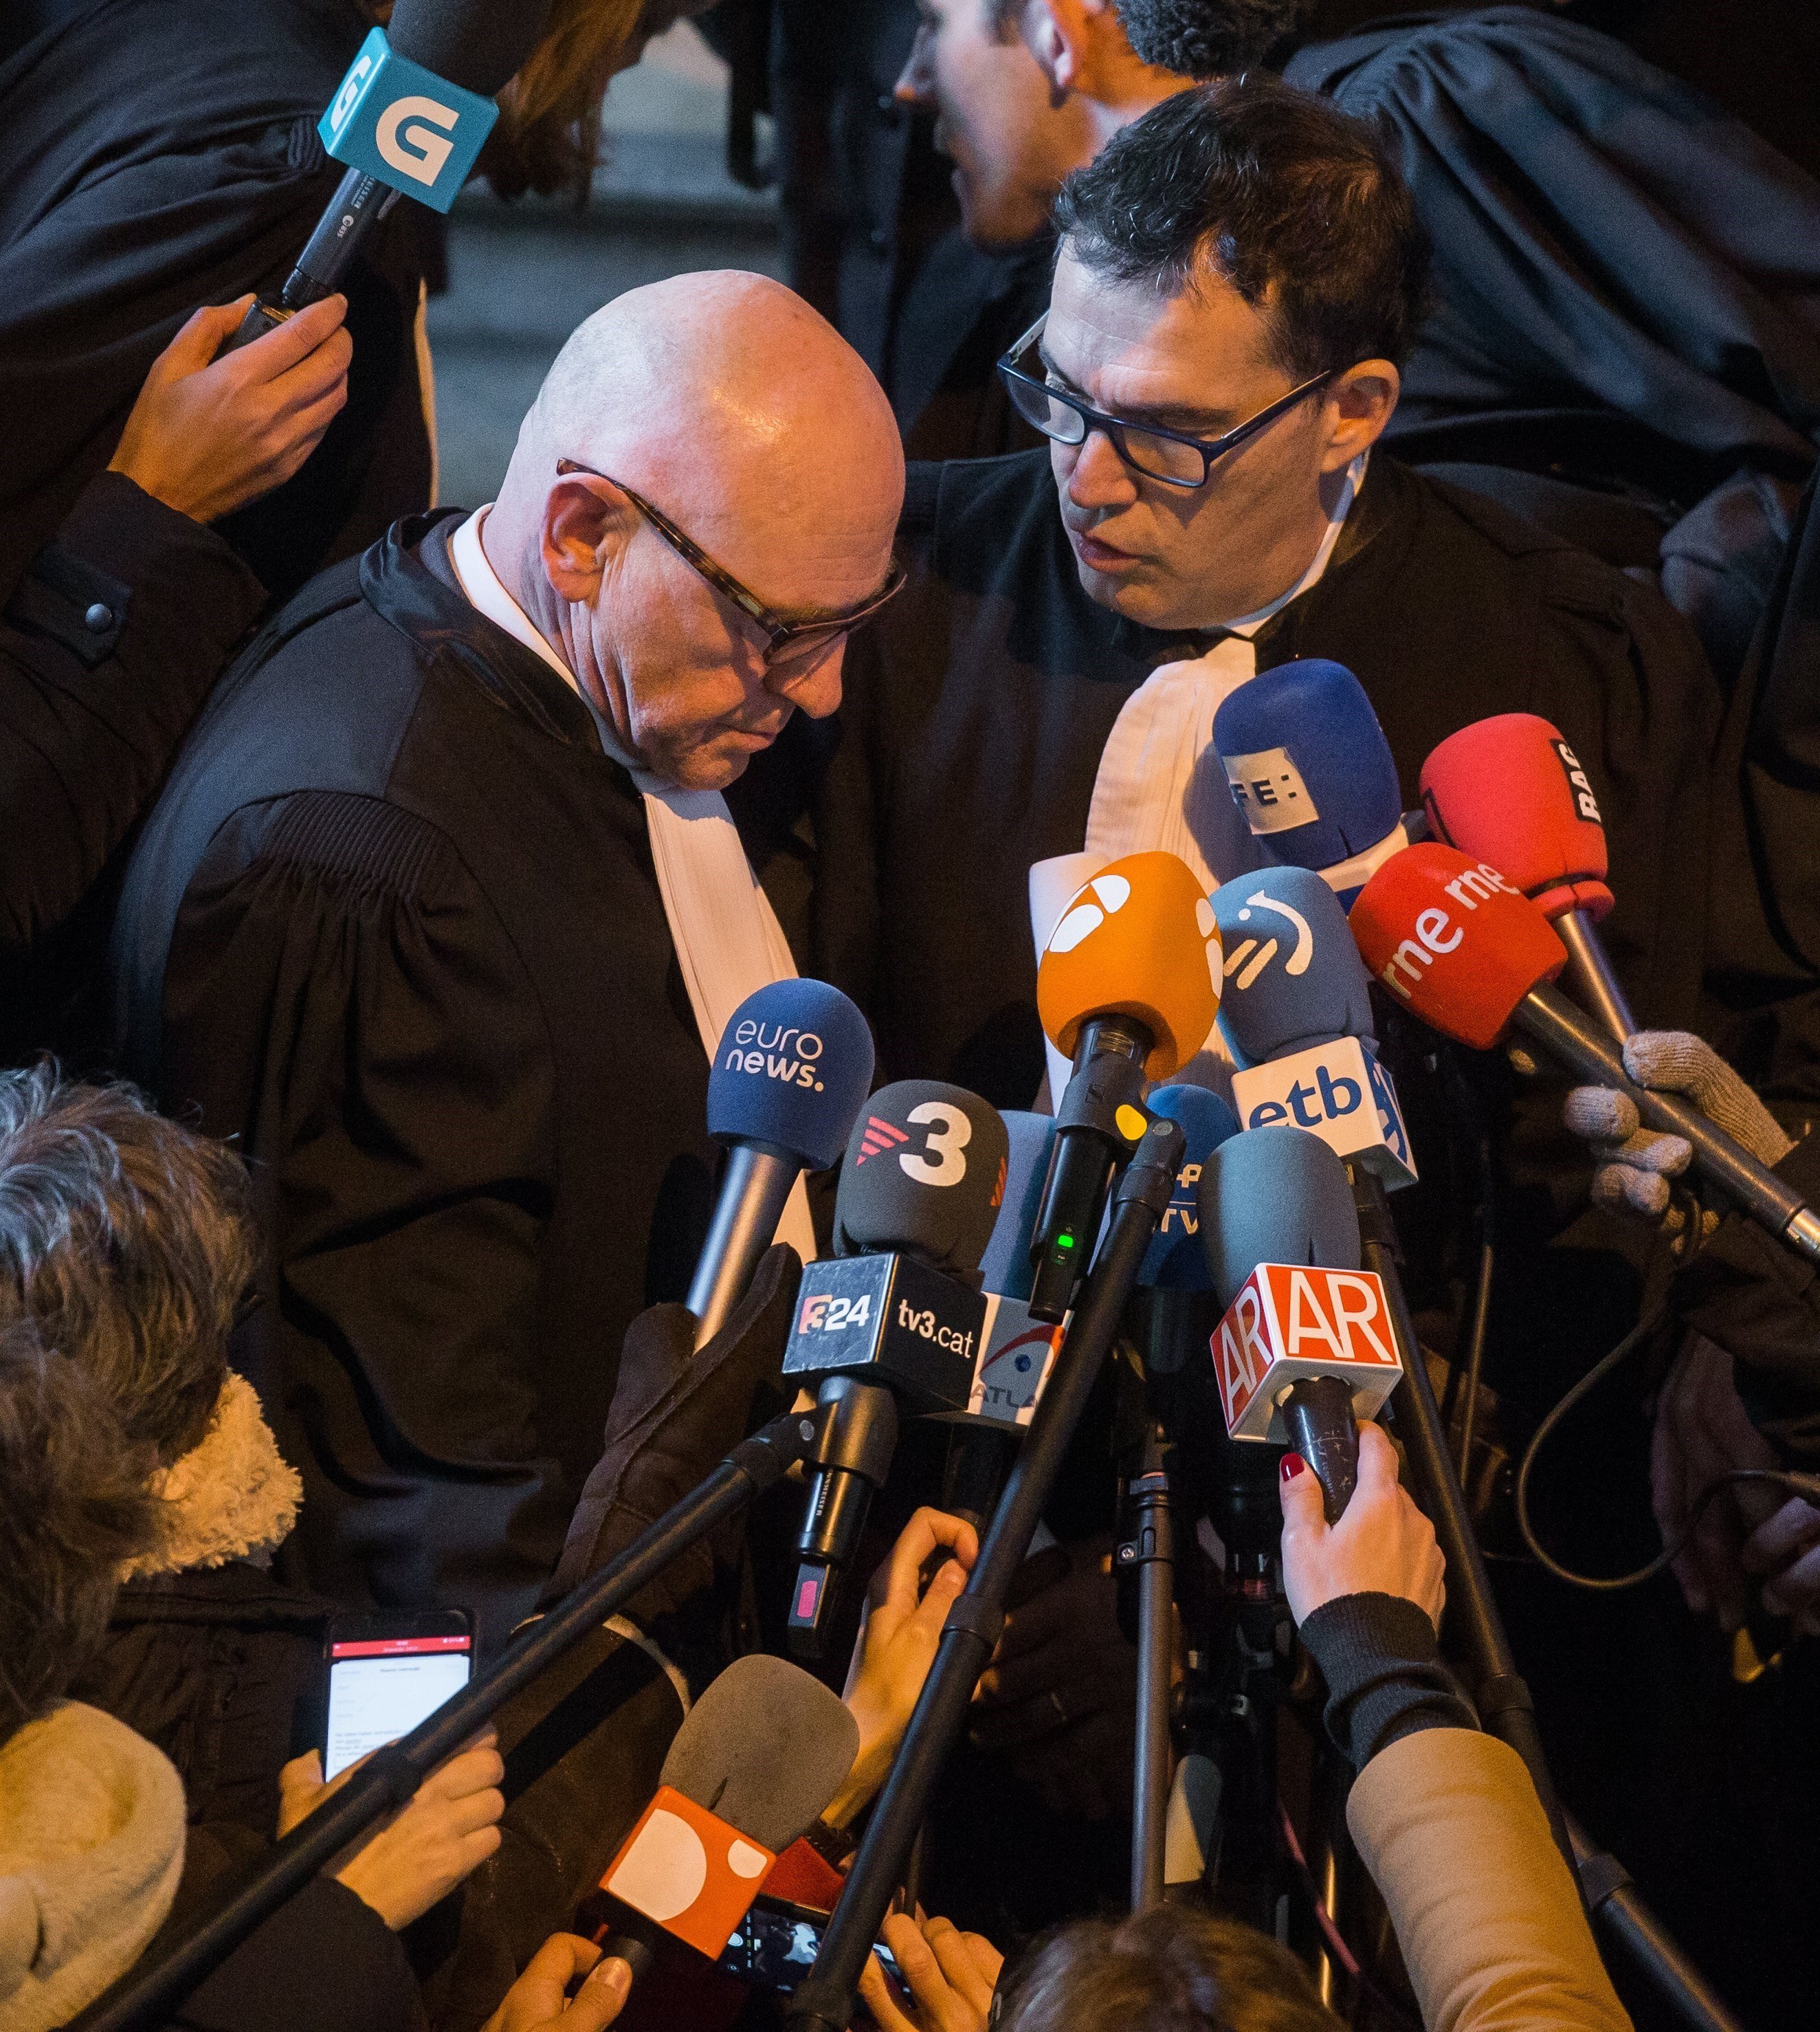 Belgian prosecutors ask for Puigdemont and ministers to be extradited